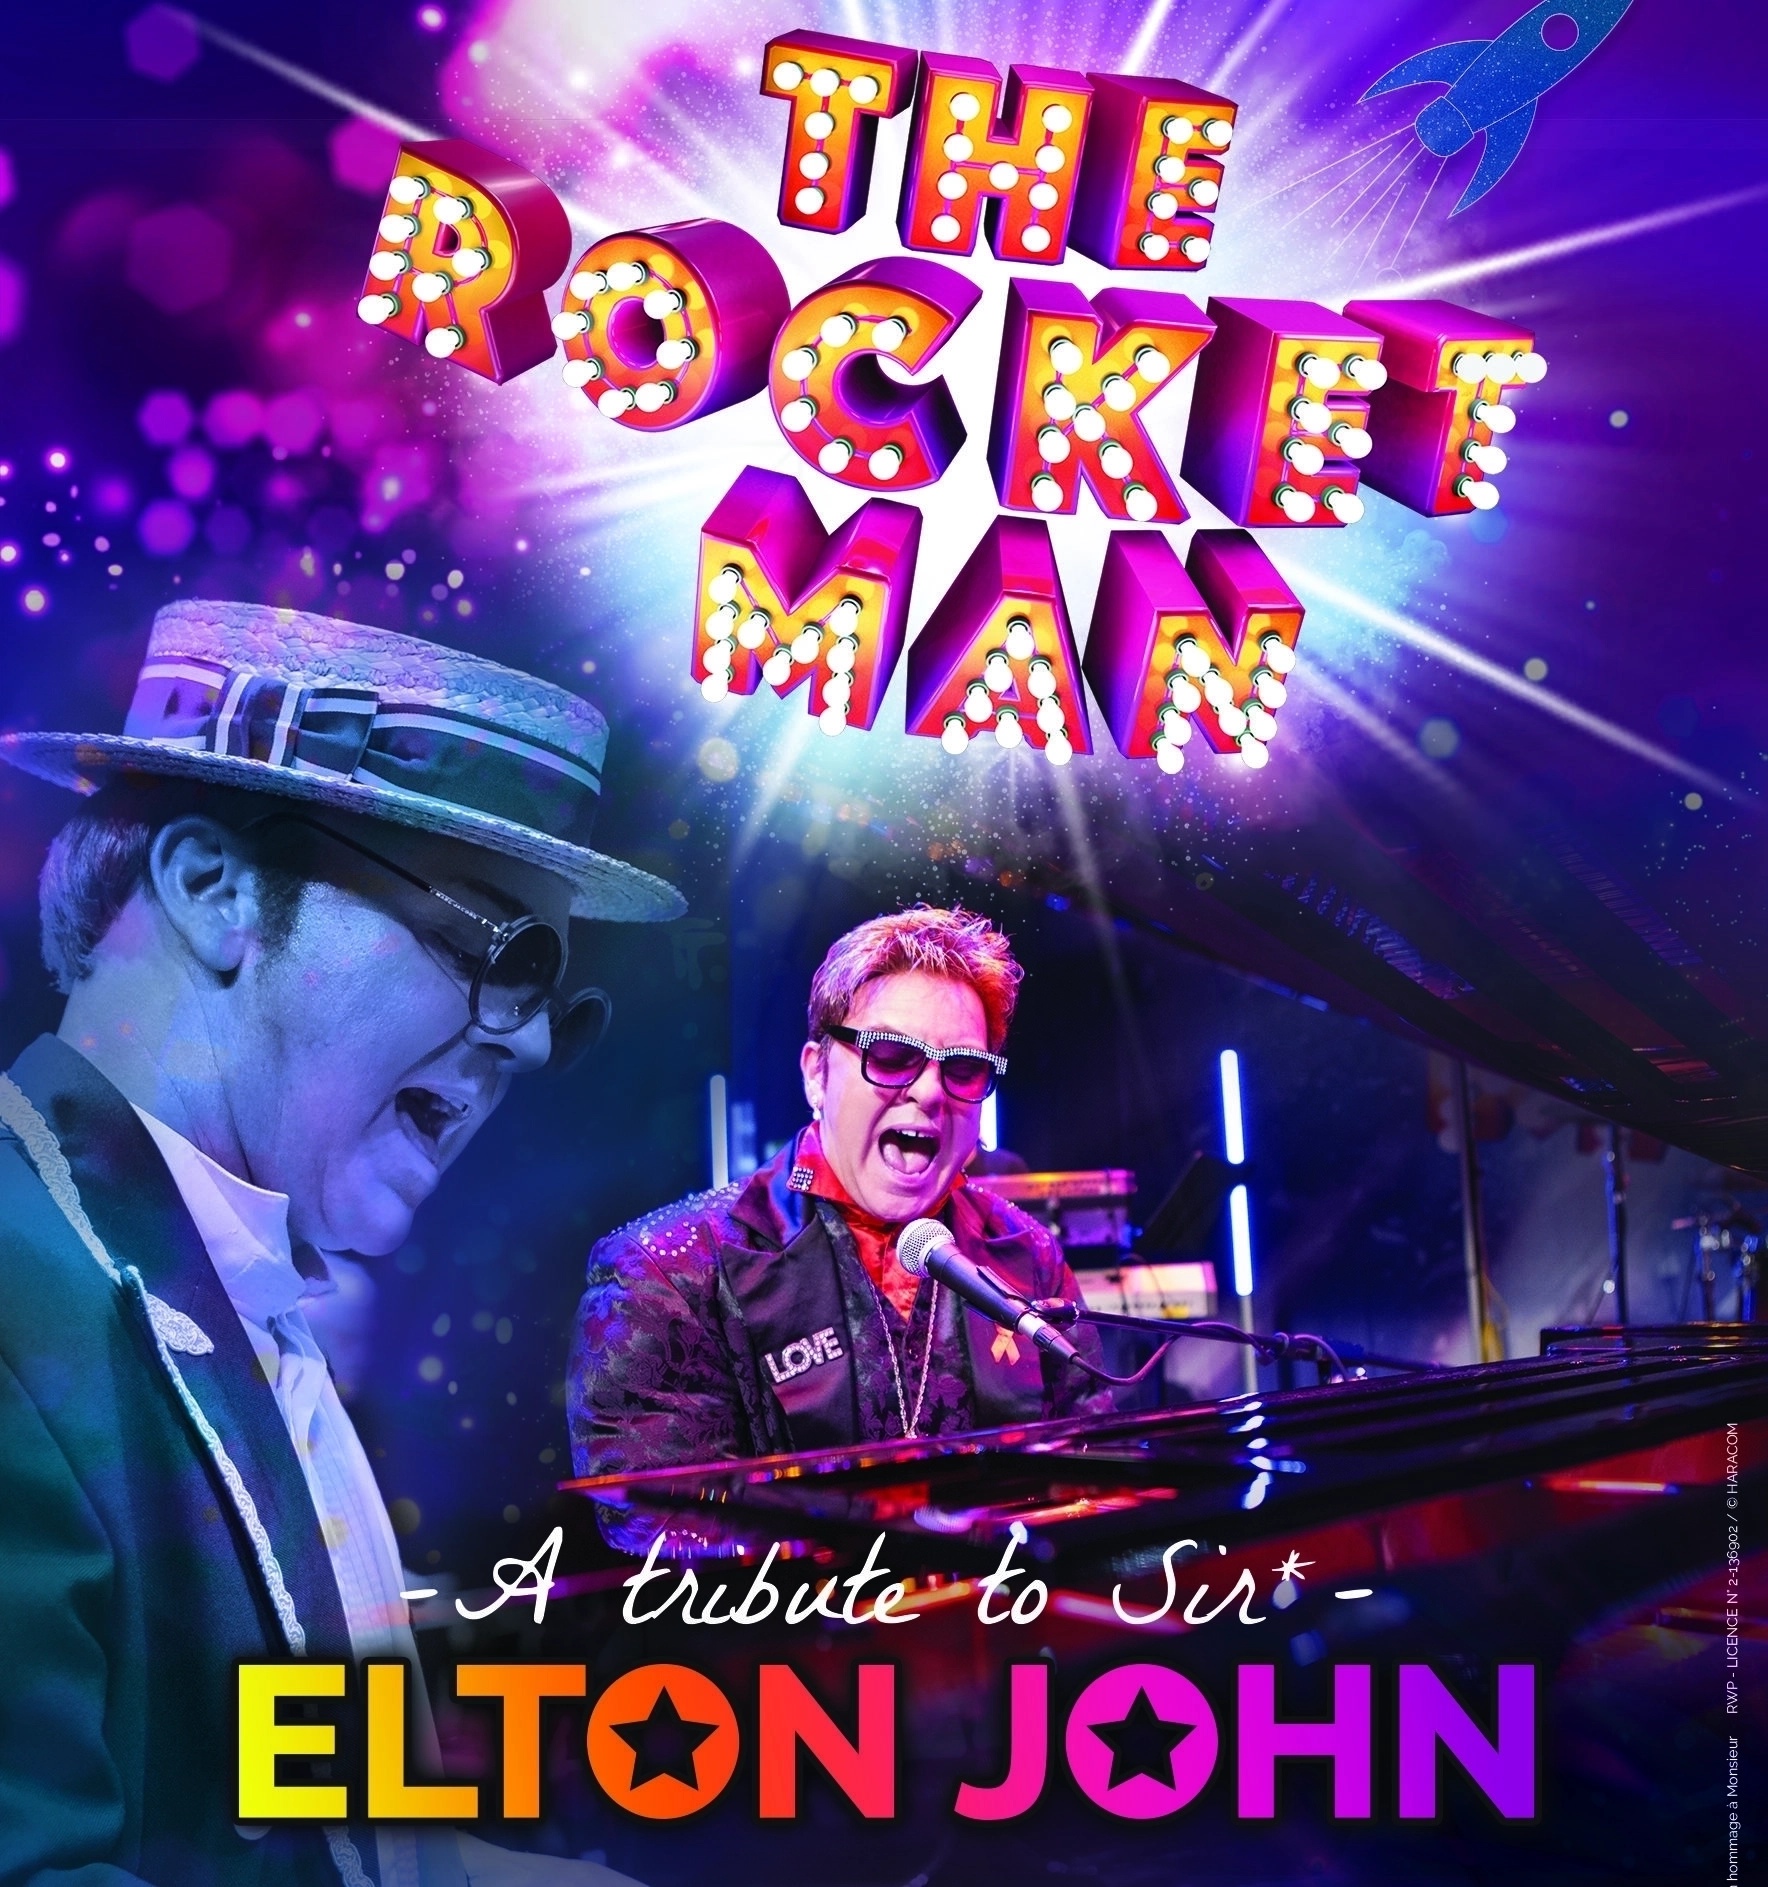 The Rocket Man in der Confluence Spectacles Tickets